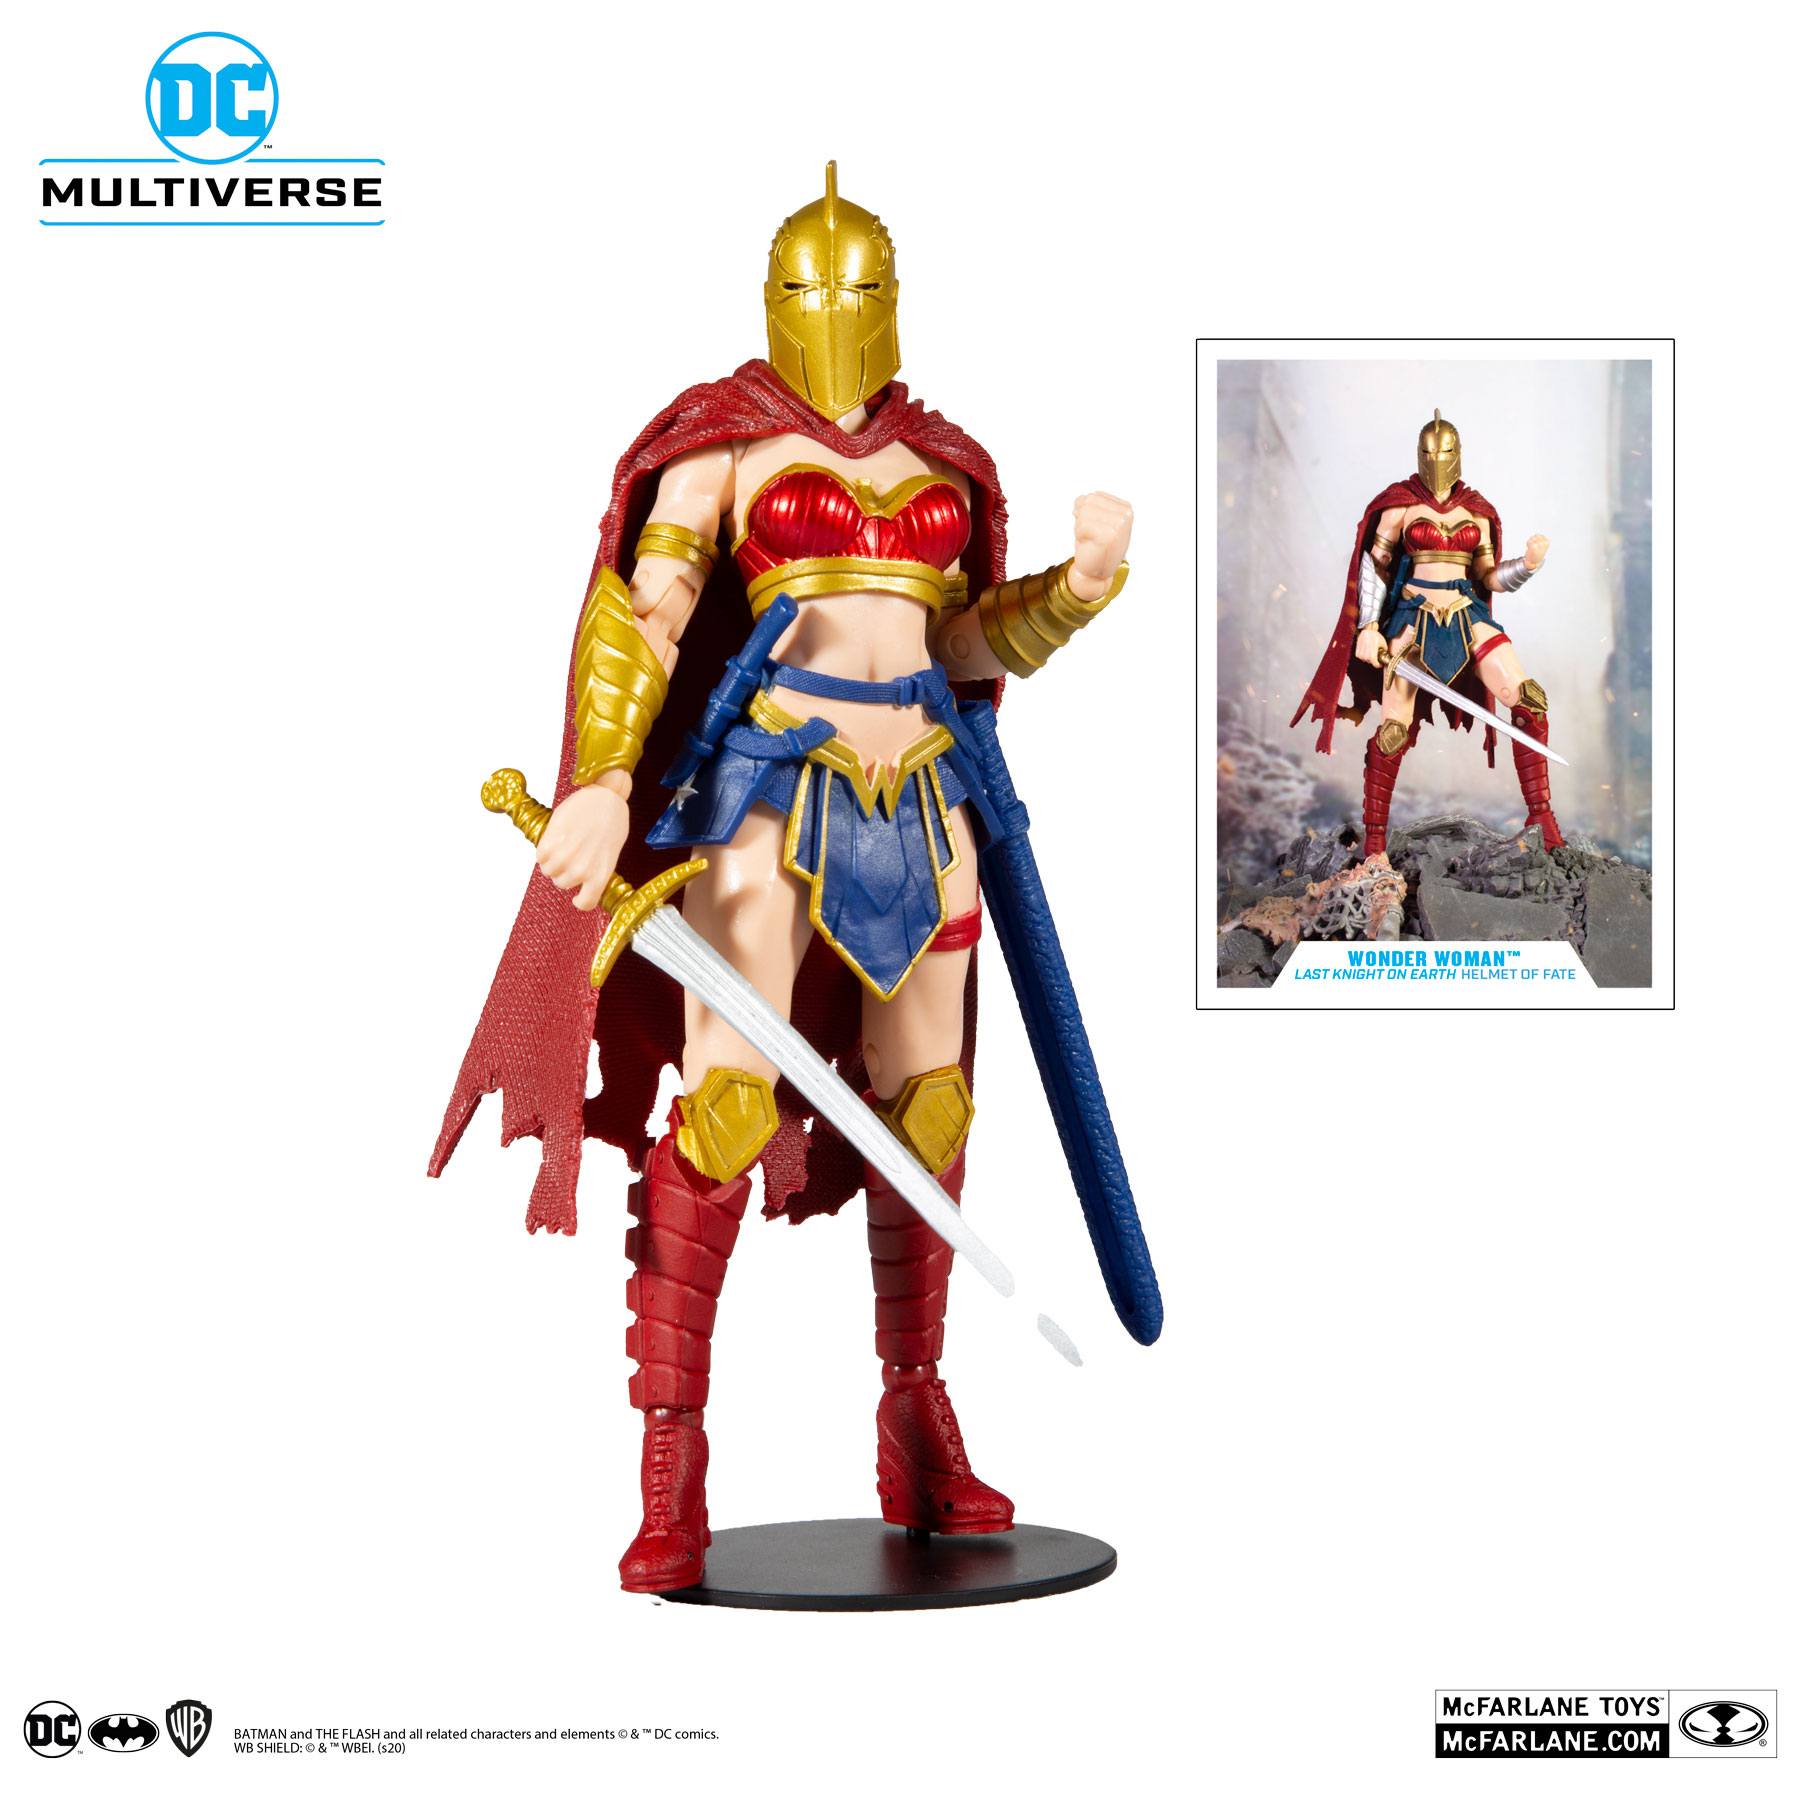 DC Multiverse Actionfigur LKOE Wonder Woman with Helmet of Fate 18 cm MCF15175-6 787926151756